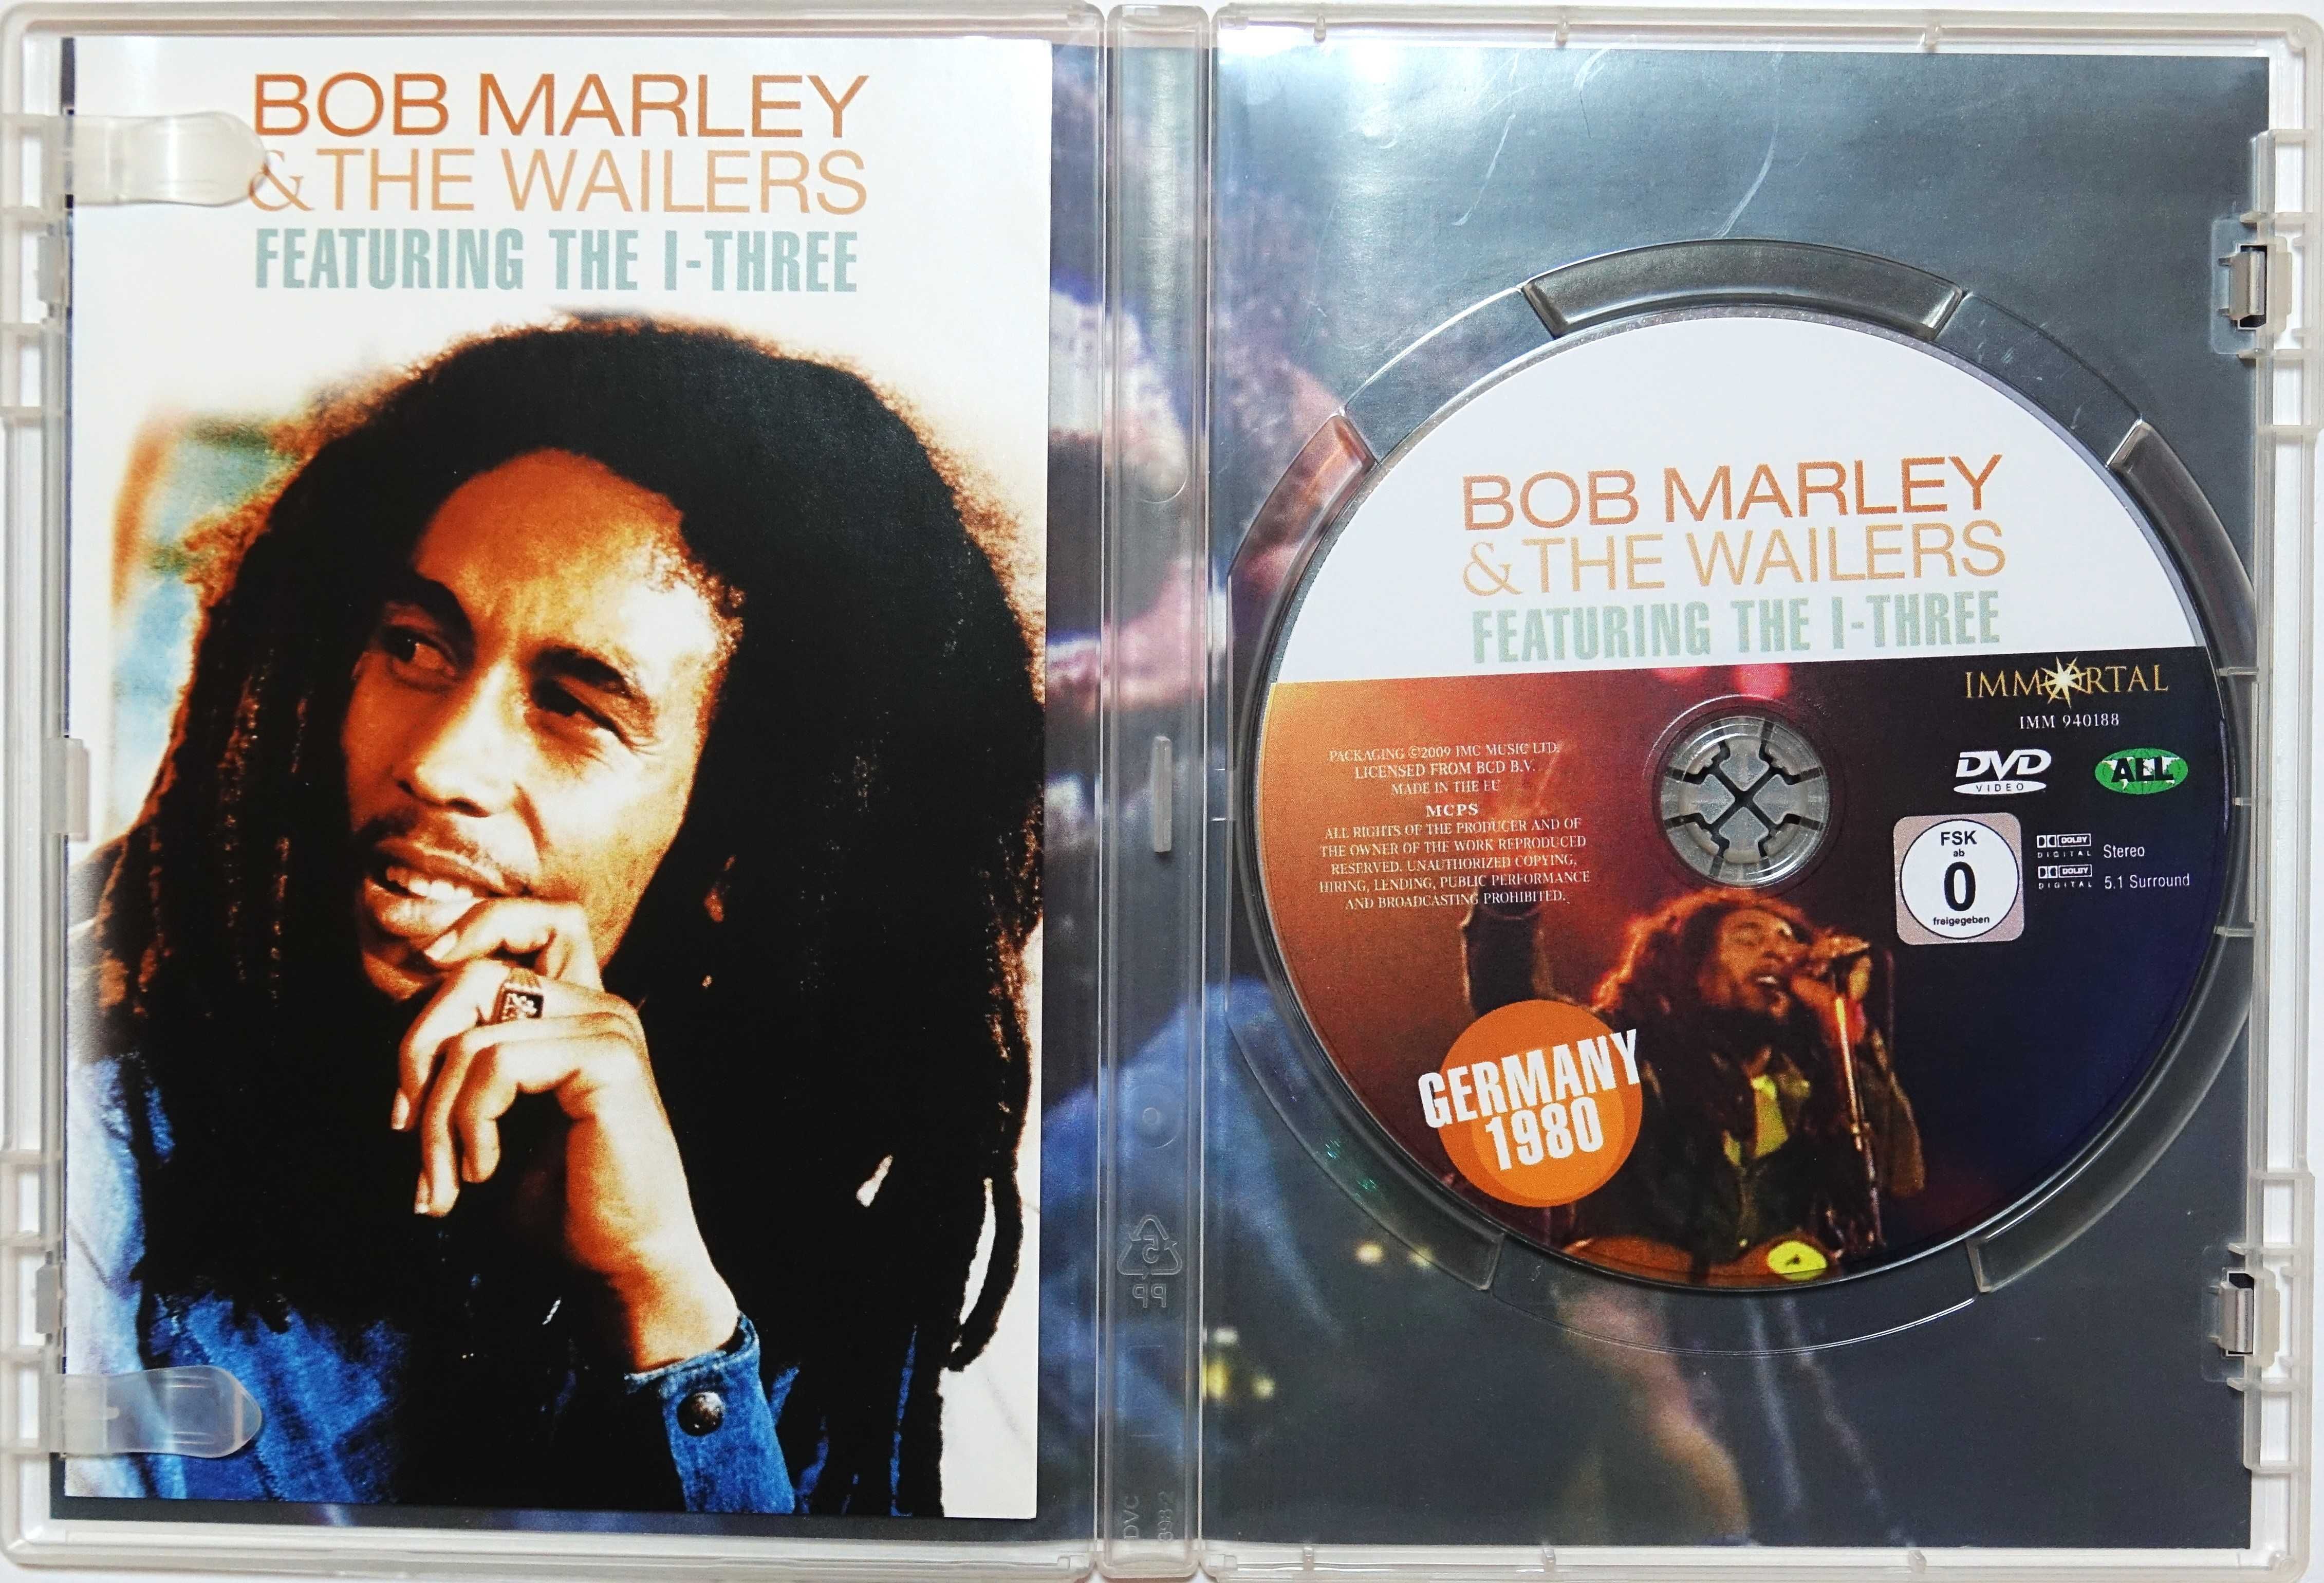 Bob Marley & The Wailers Featured The I Three - Germany 1980 (DVD)